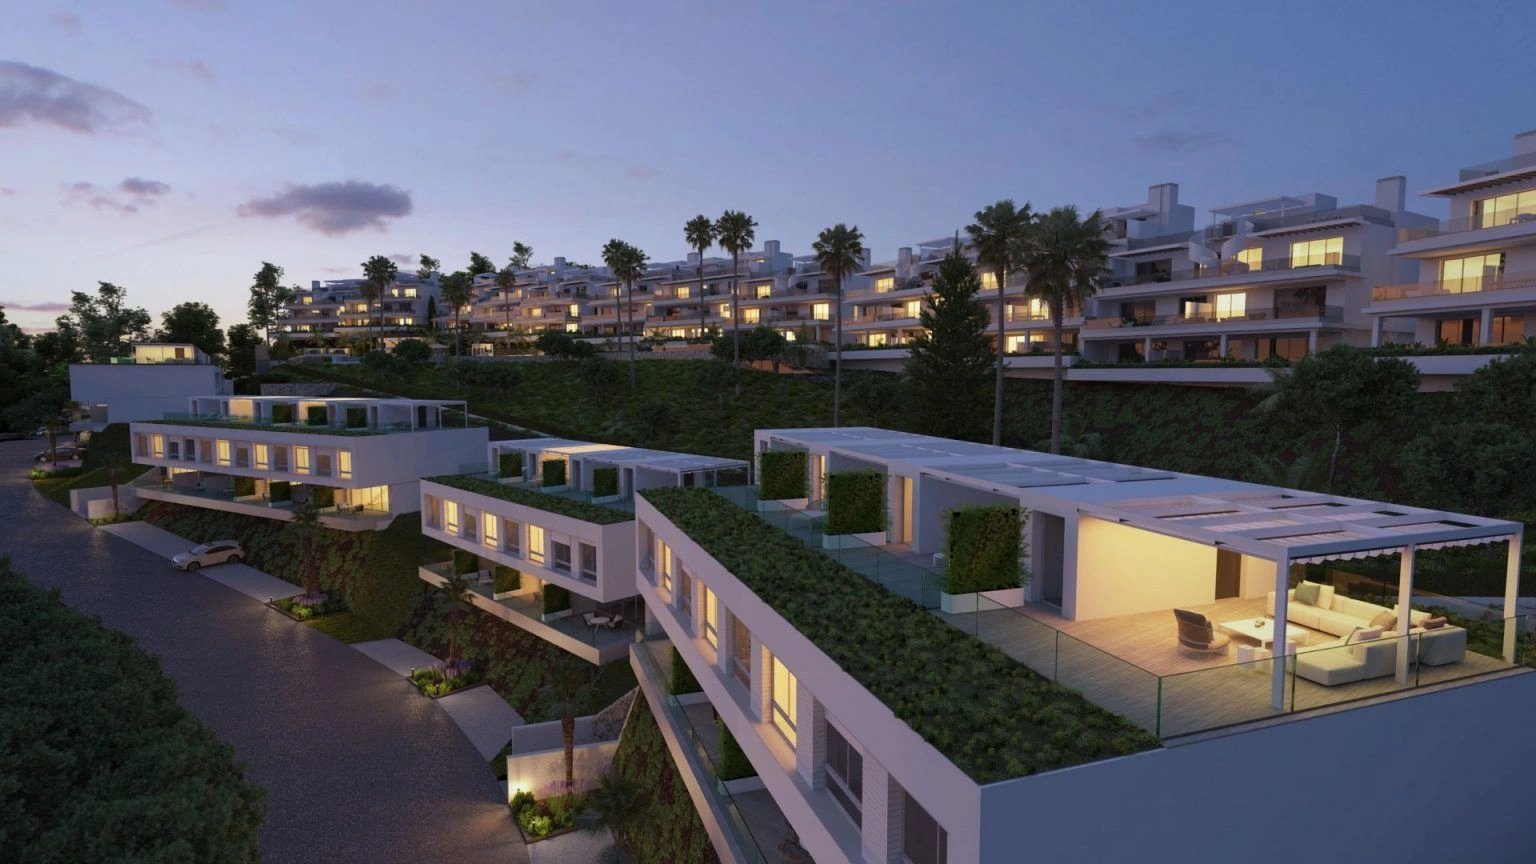 Modern Townhouses With Sea Views Aerial View Night